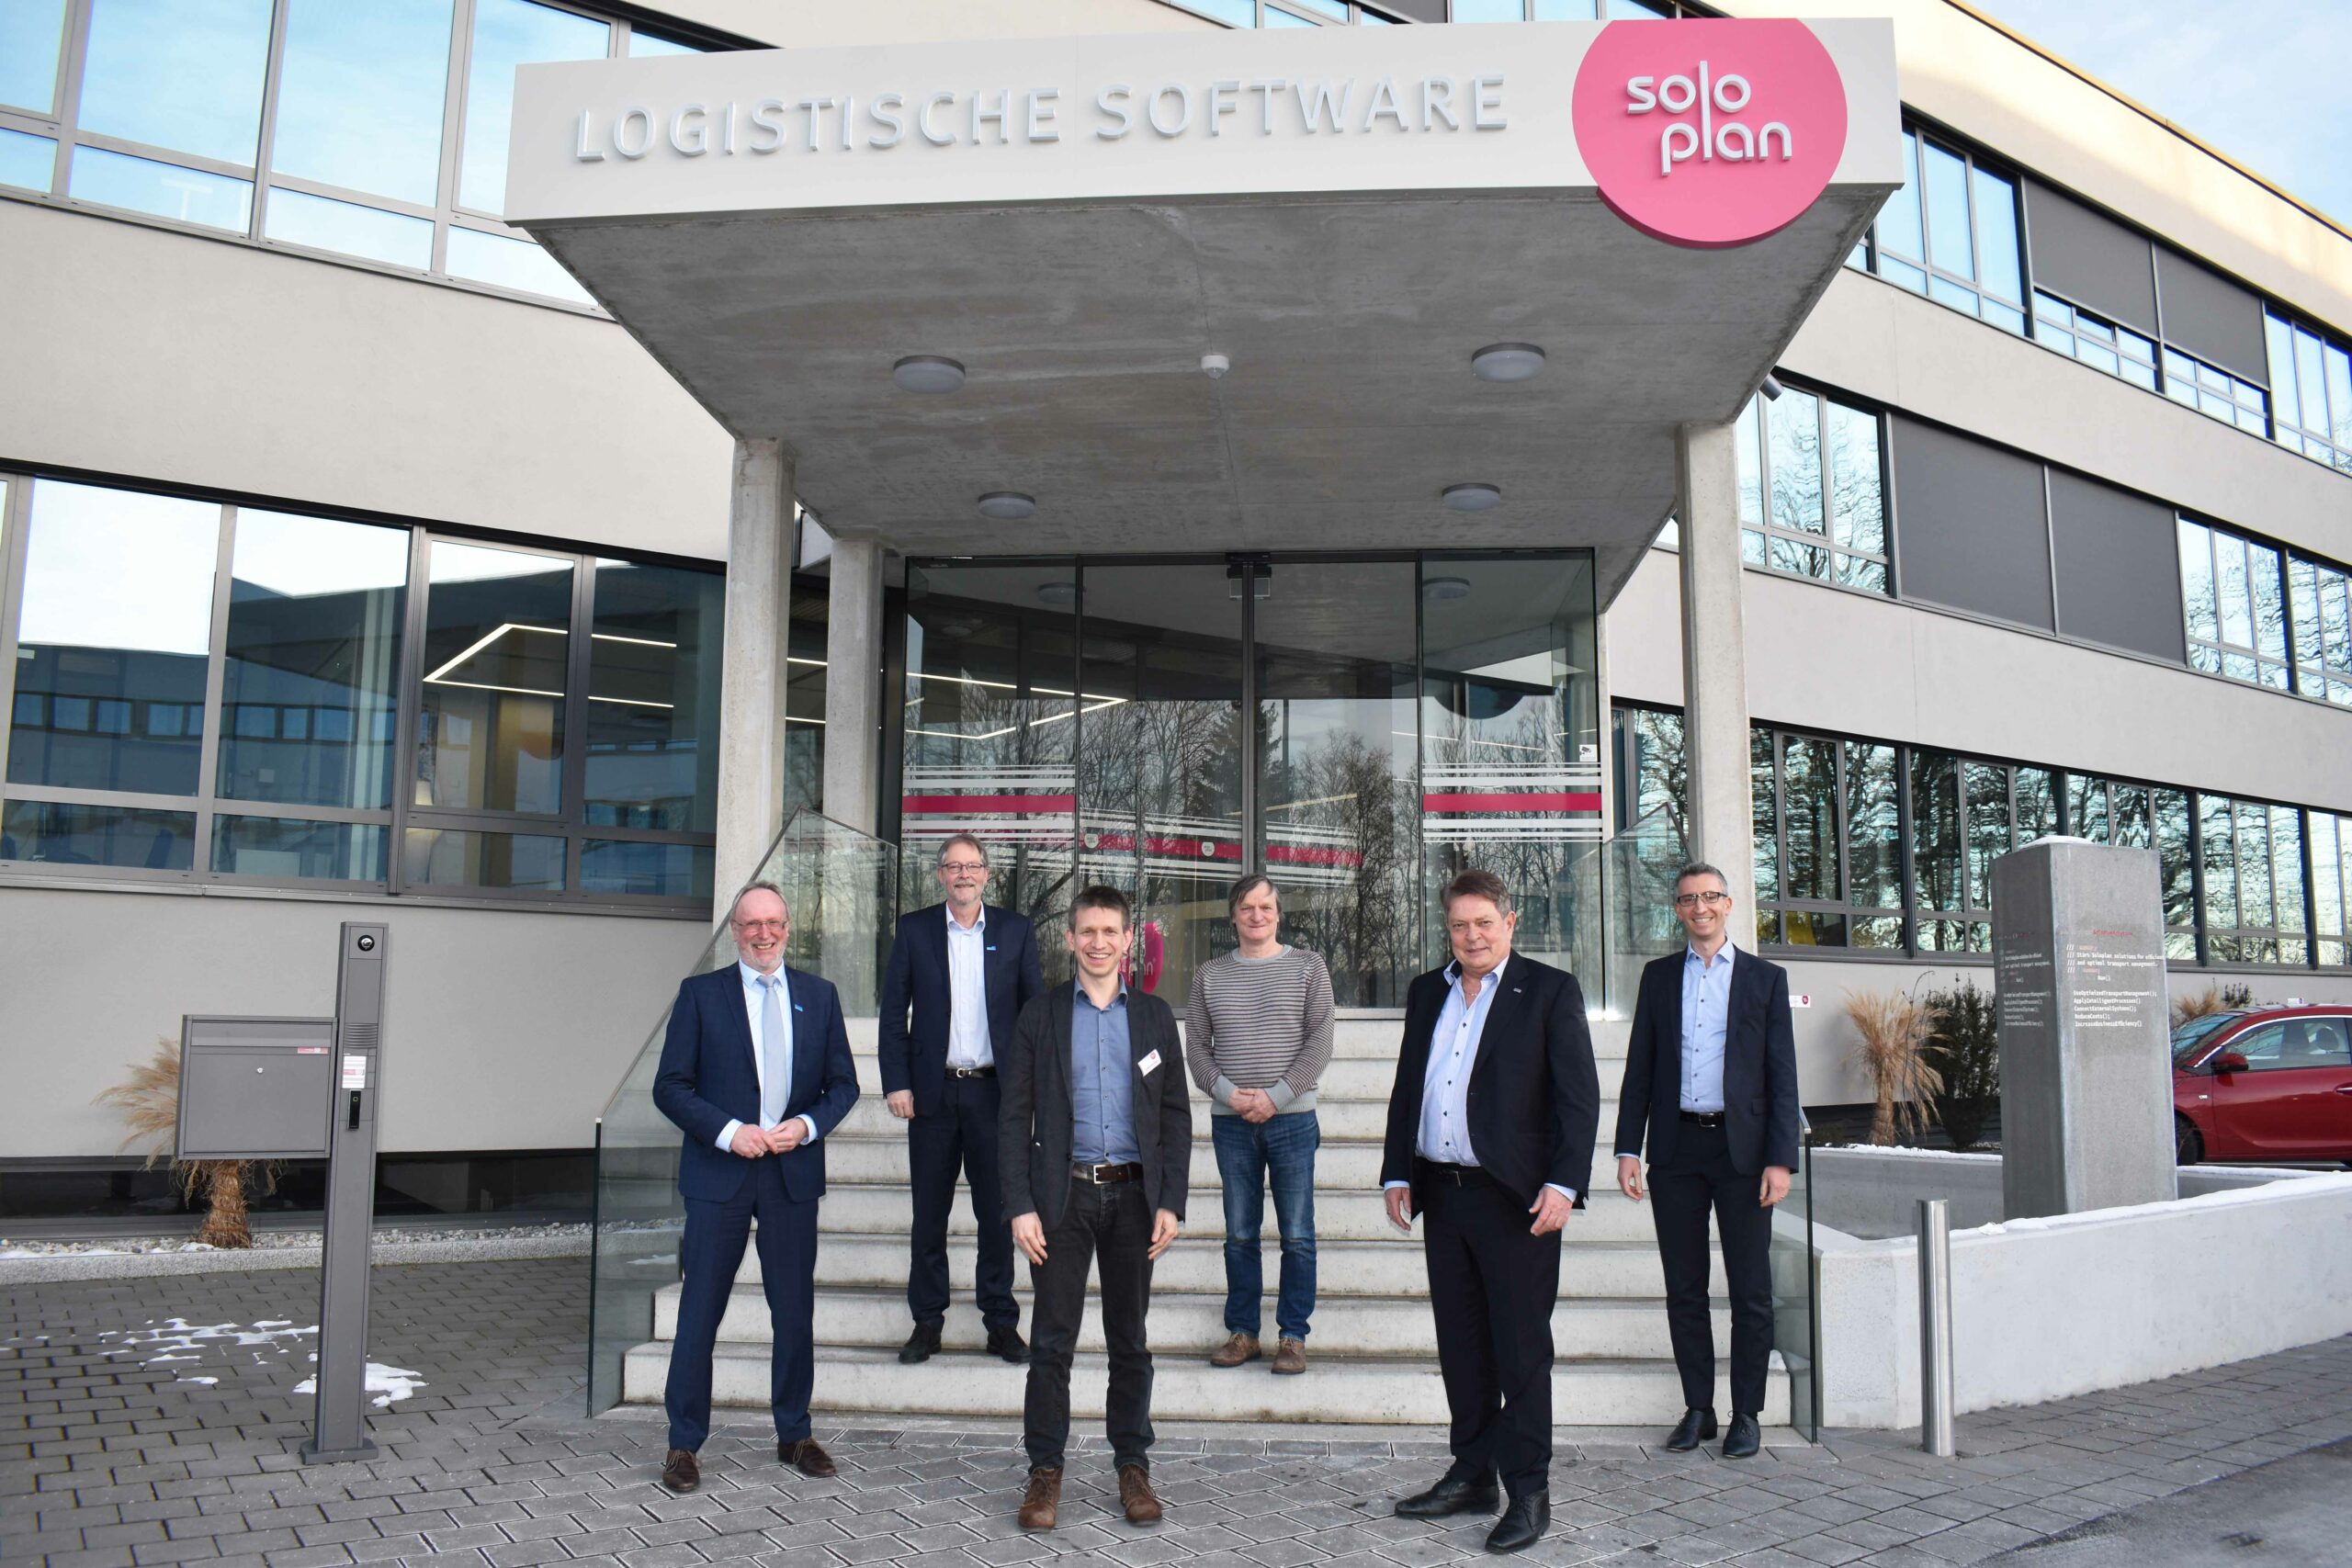 Soloplan extends cooperation agreement with the University of Kempten